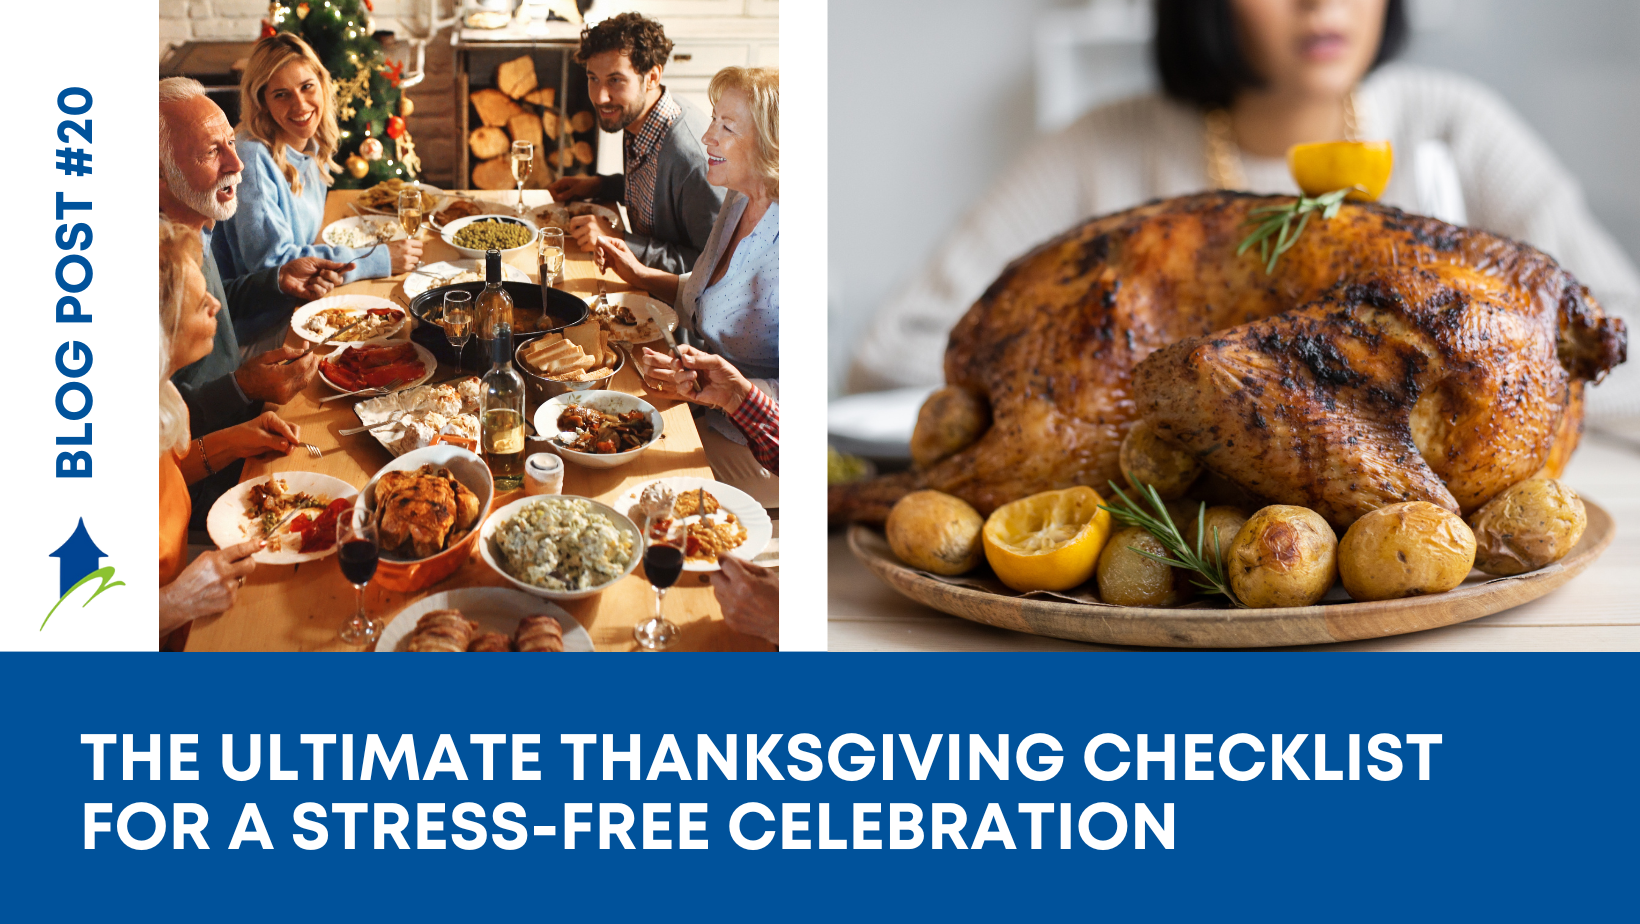 The Ultimate Thanksgiving Checklist for a Stress-Free Celebration